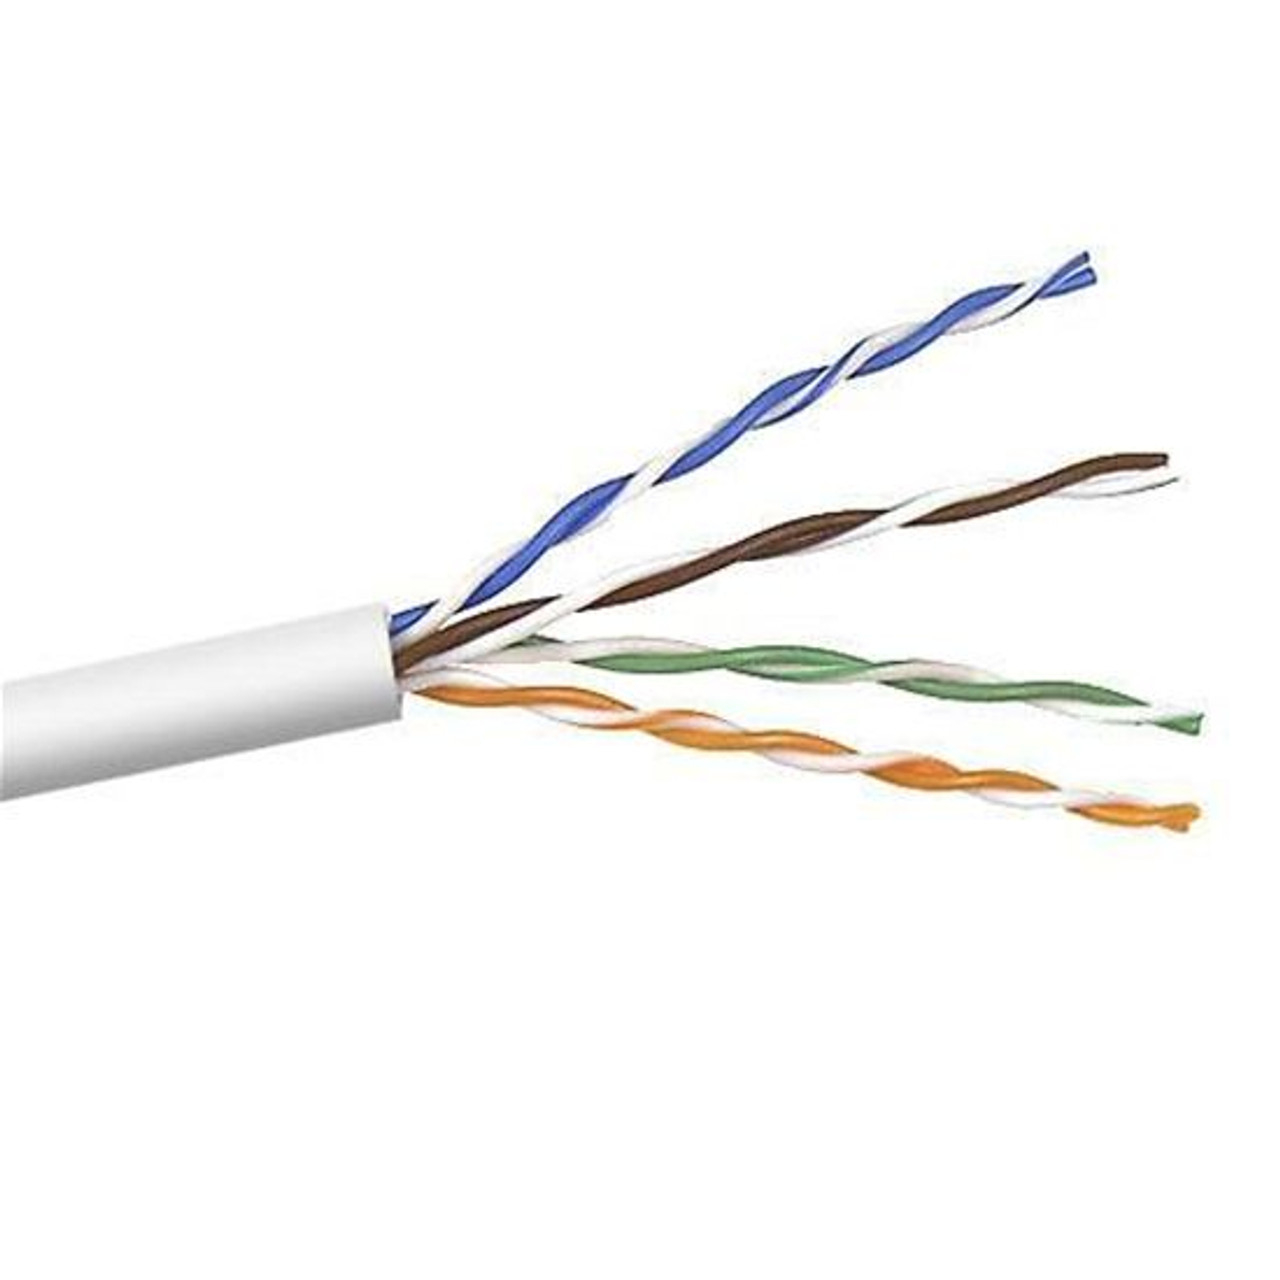 Channel Master 1000' FT White CAT5e Cable Bulk Roll 24 AWG Solid Copper Bulk Roll Network Cable CMR Riser Rated High Speed Ethernet Line 4 Twisted Pair